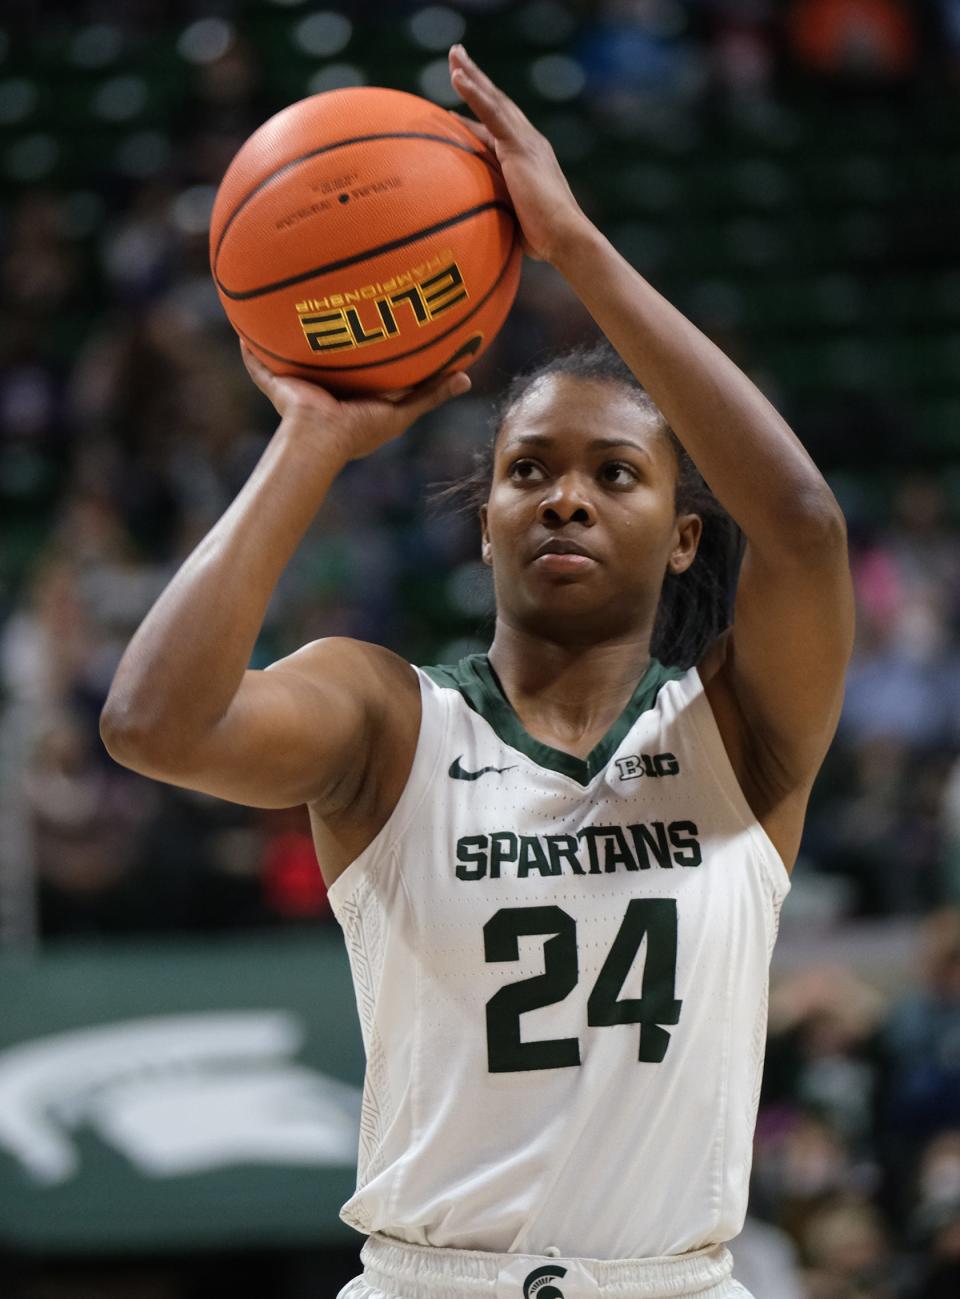 Nia Clouden is second all-time in points scored at MSU.